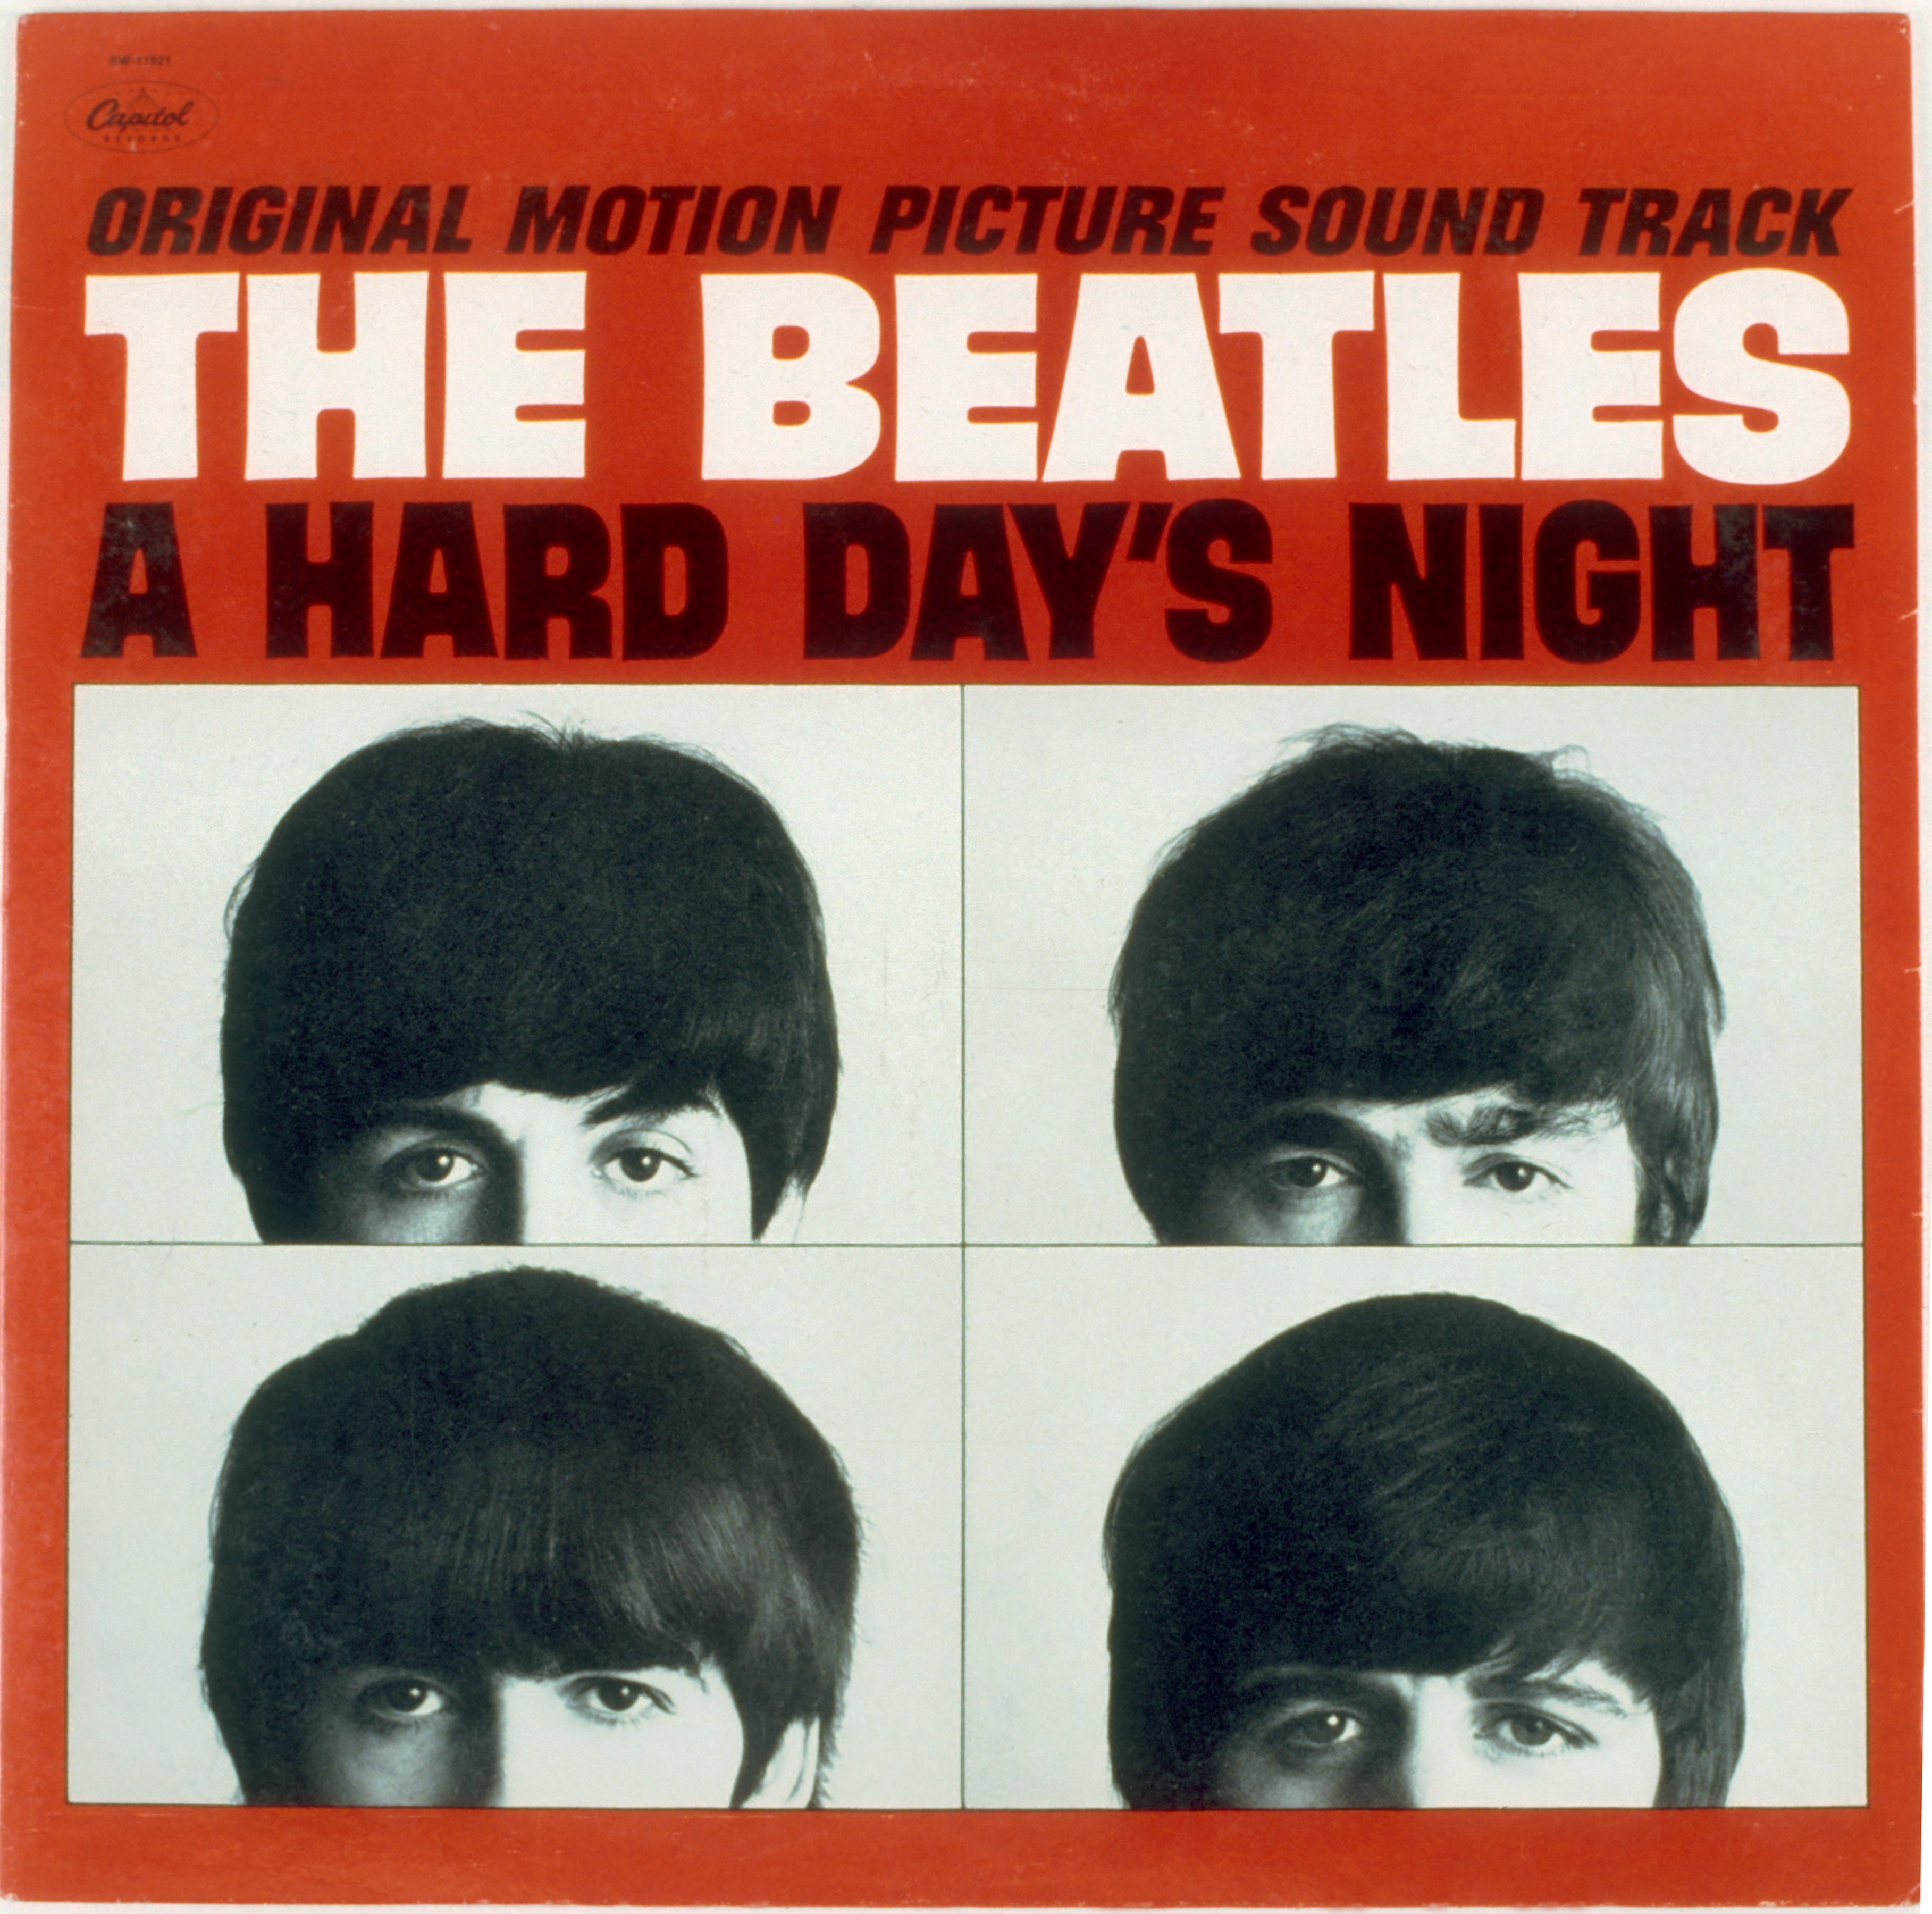 Paul McCartney, John Lennon, George Harrison, and Ringo Starr on the cover of The Beatles' album 'A Hard Day's Night'